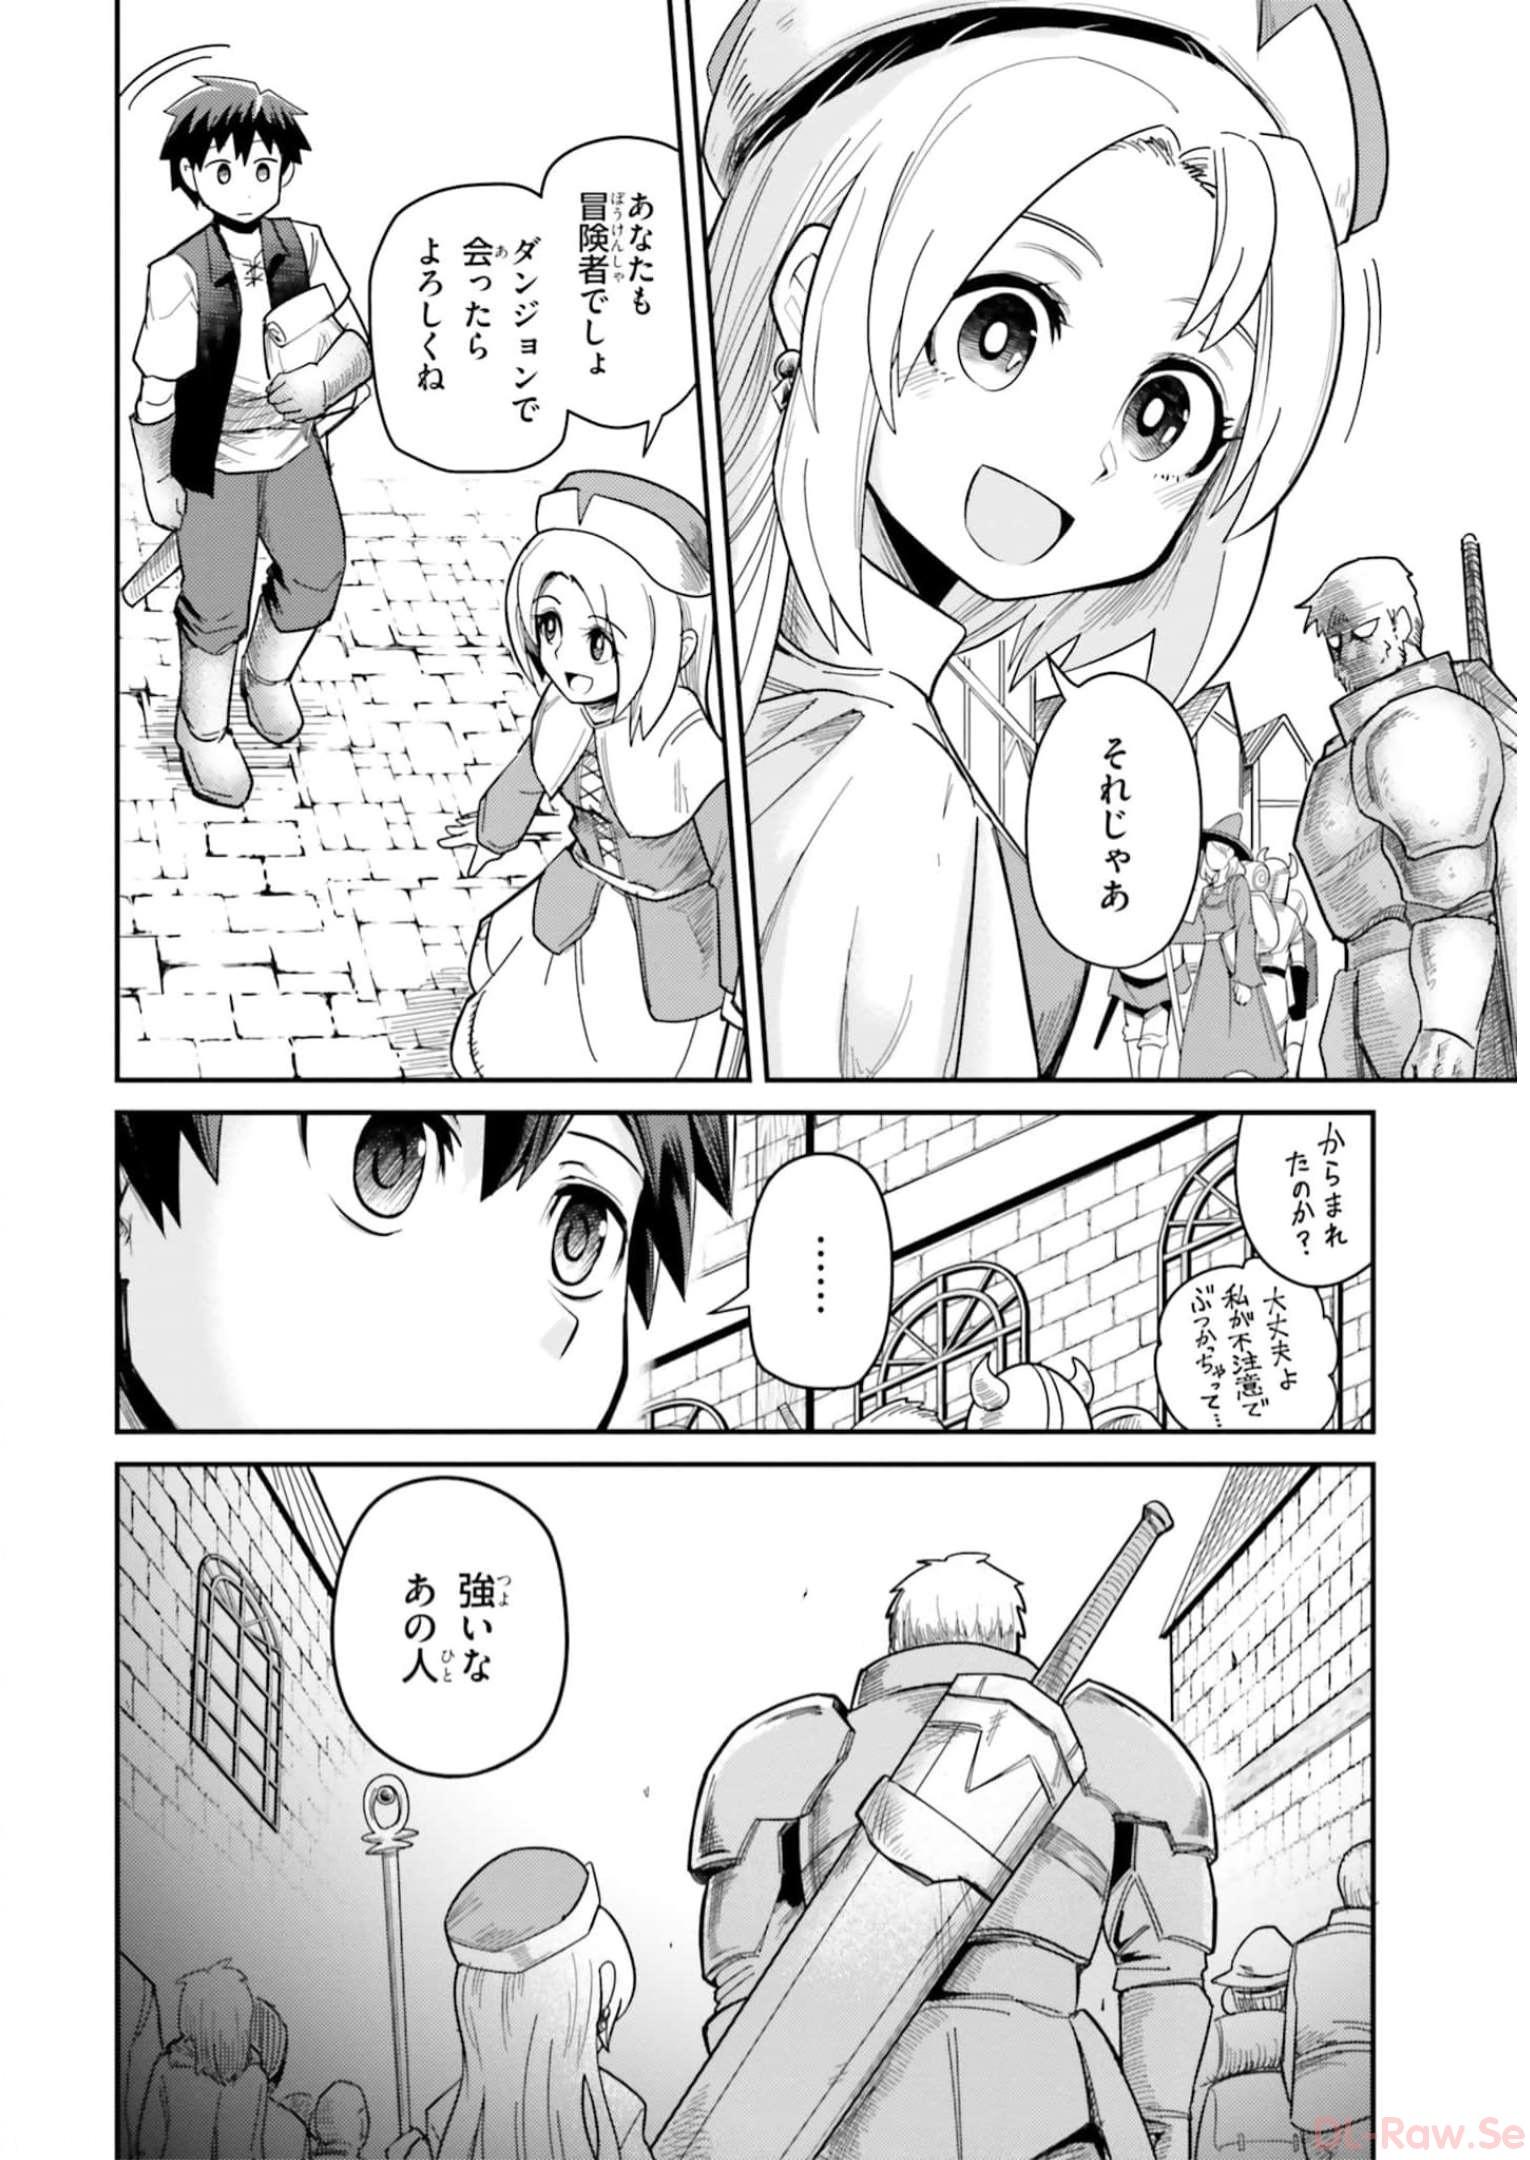 Dungeon Friends Forever Dungeon's Childhood Friend ダンジョンの幼なじみ 第7話 - Page 2